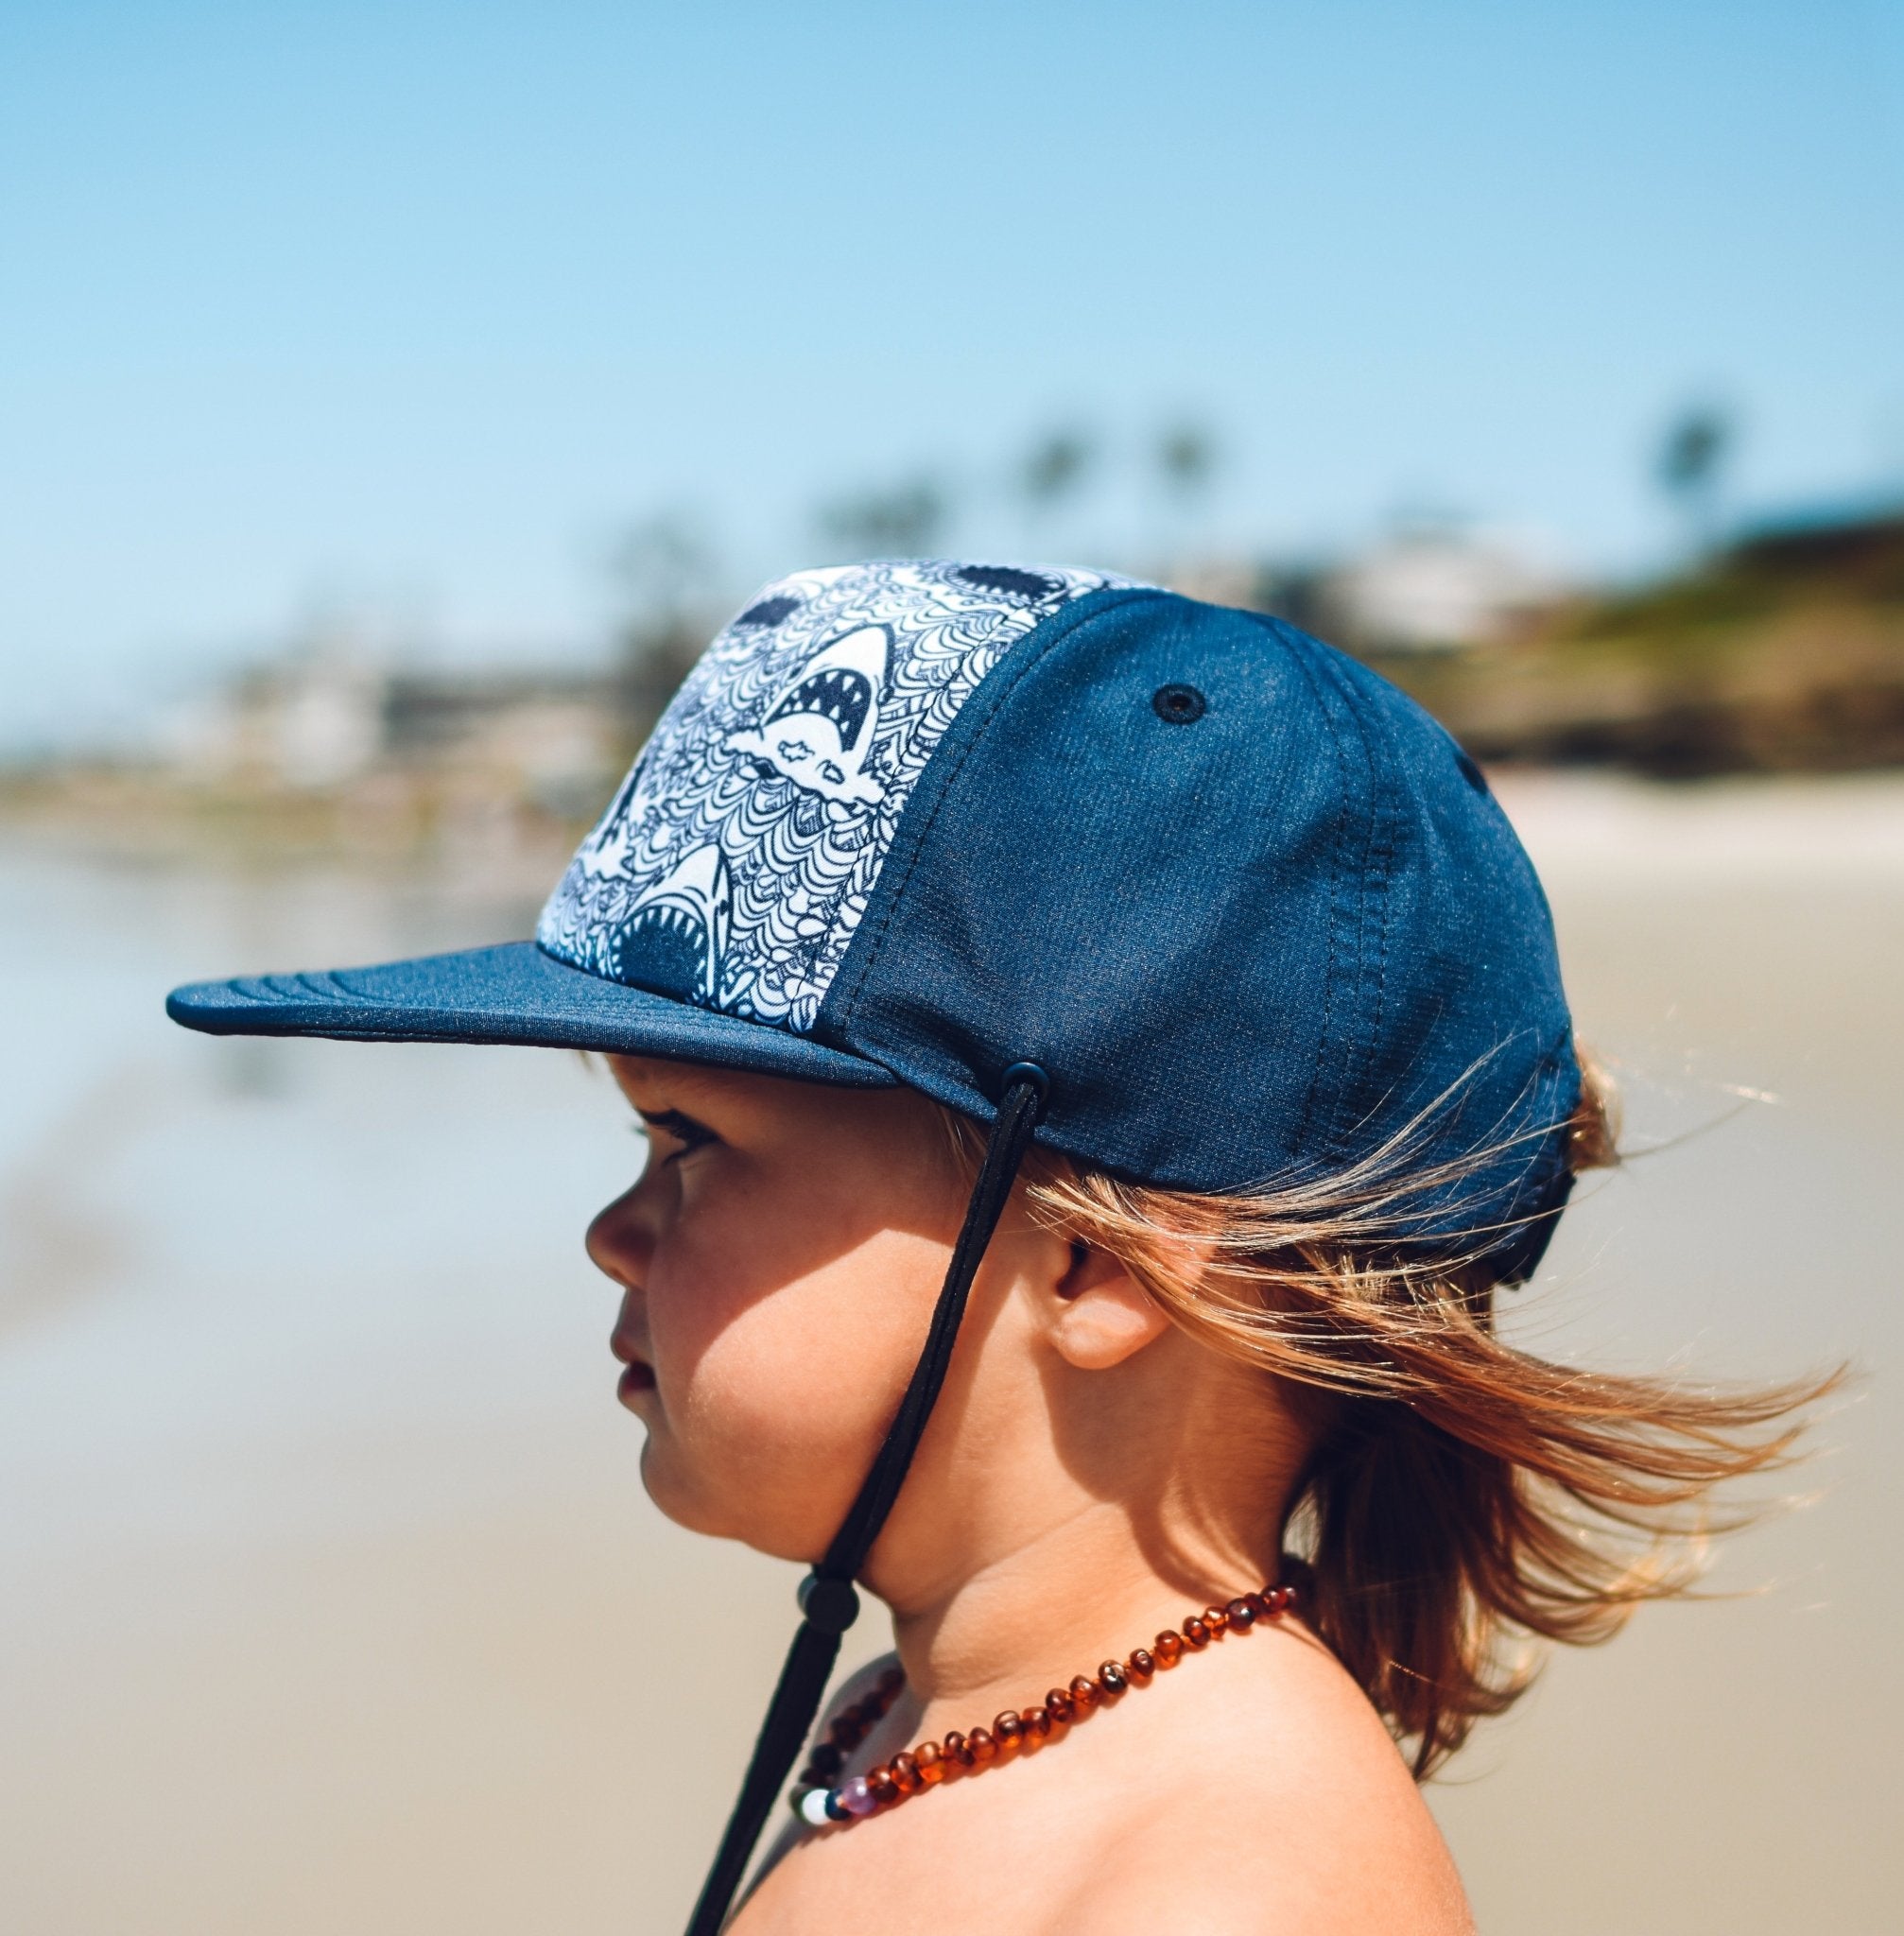 An image of a child in the Surf Shark Hat.